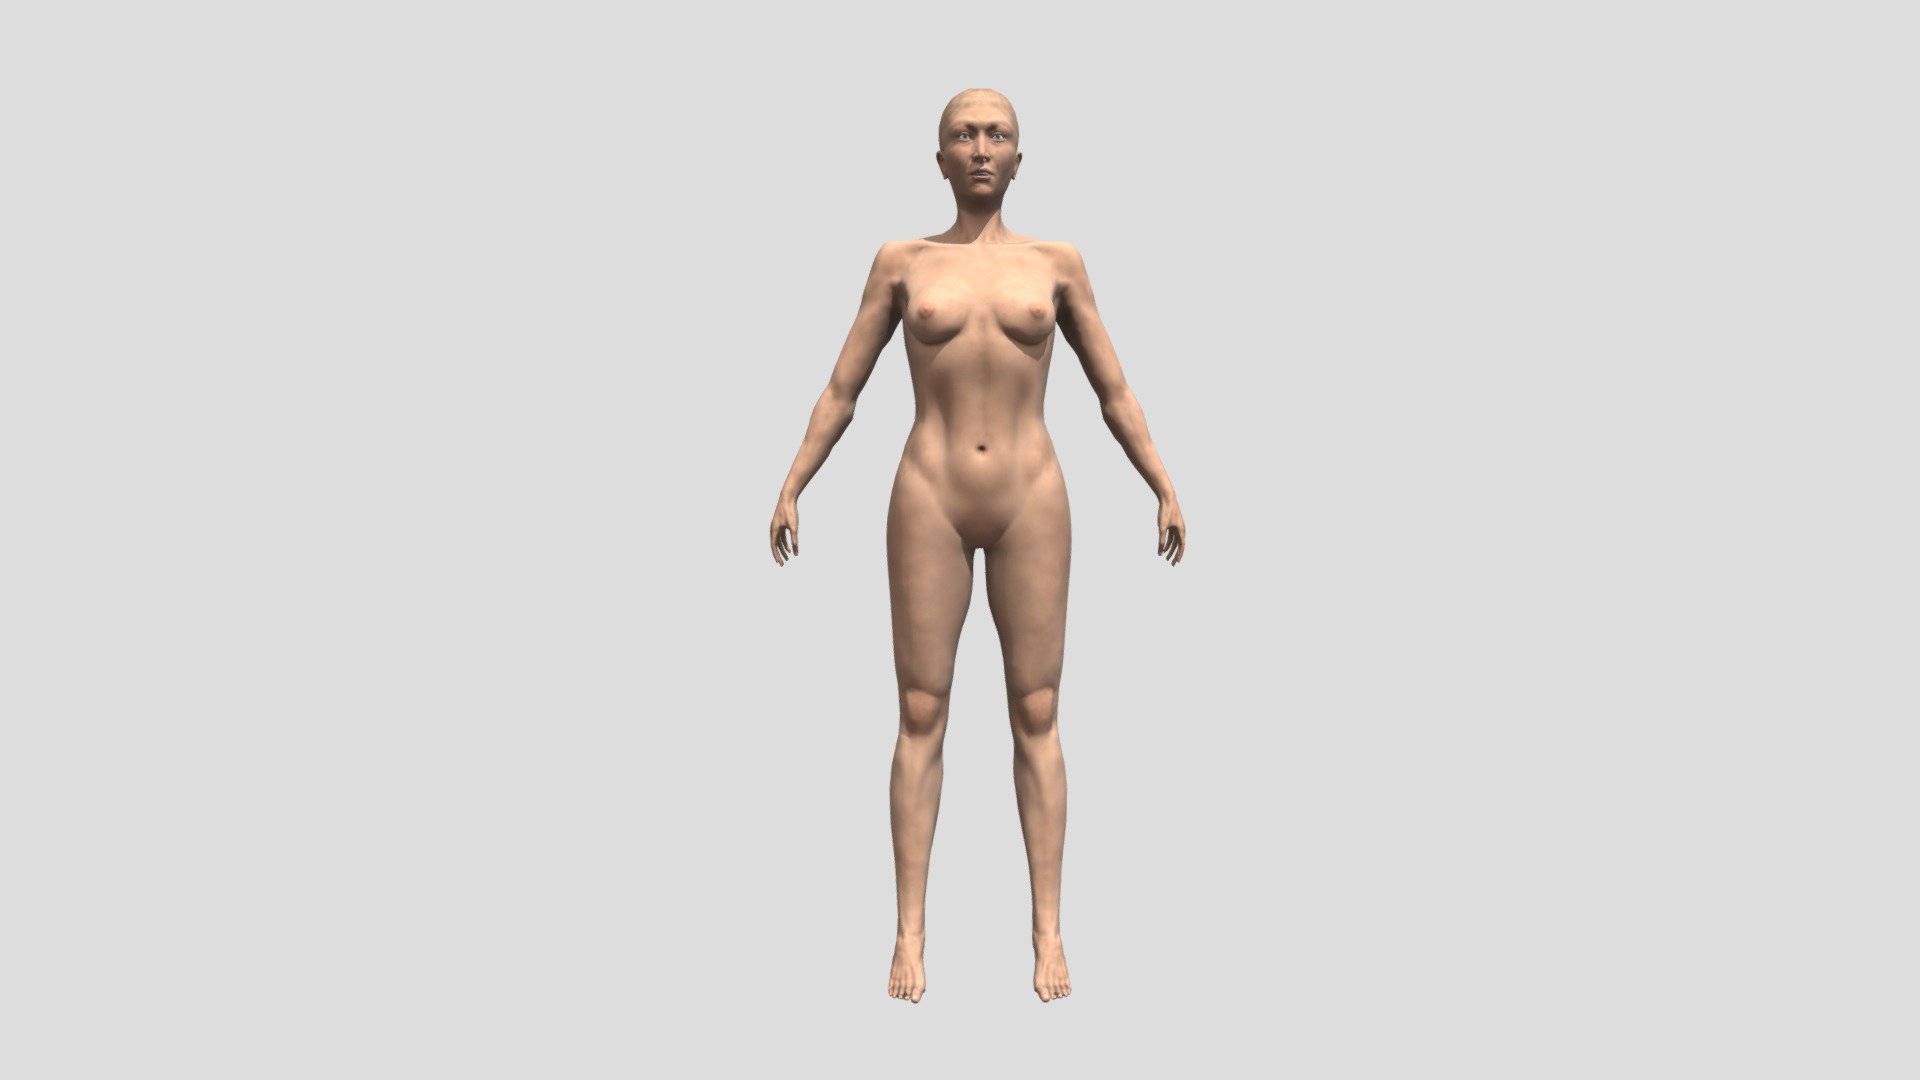 Just body without clothes and without hair, i will try to add hair later 3d model